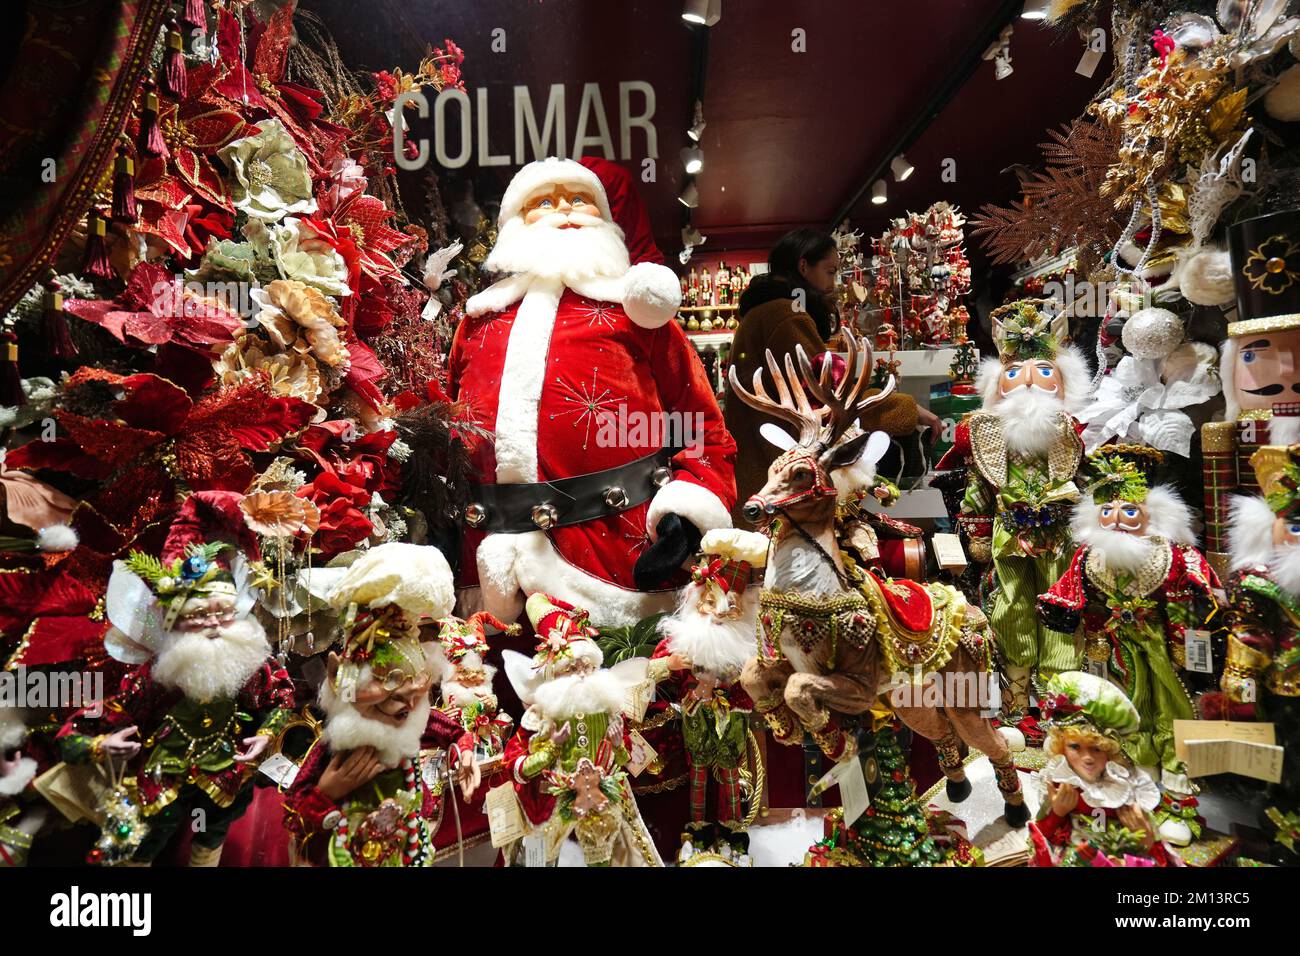 Christmas market decoration as a symbol of winter holidays and the New Year. Colmar. Alsace. France. Stock Photo